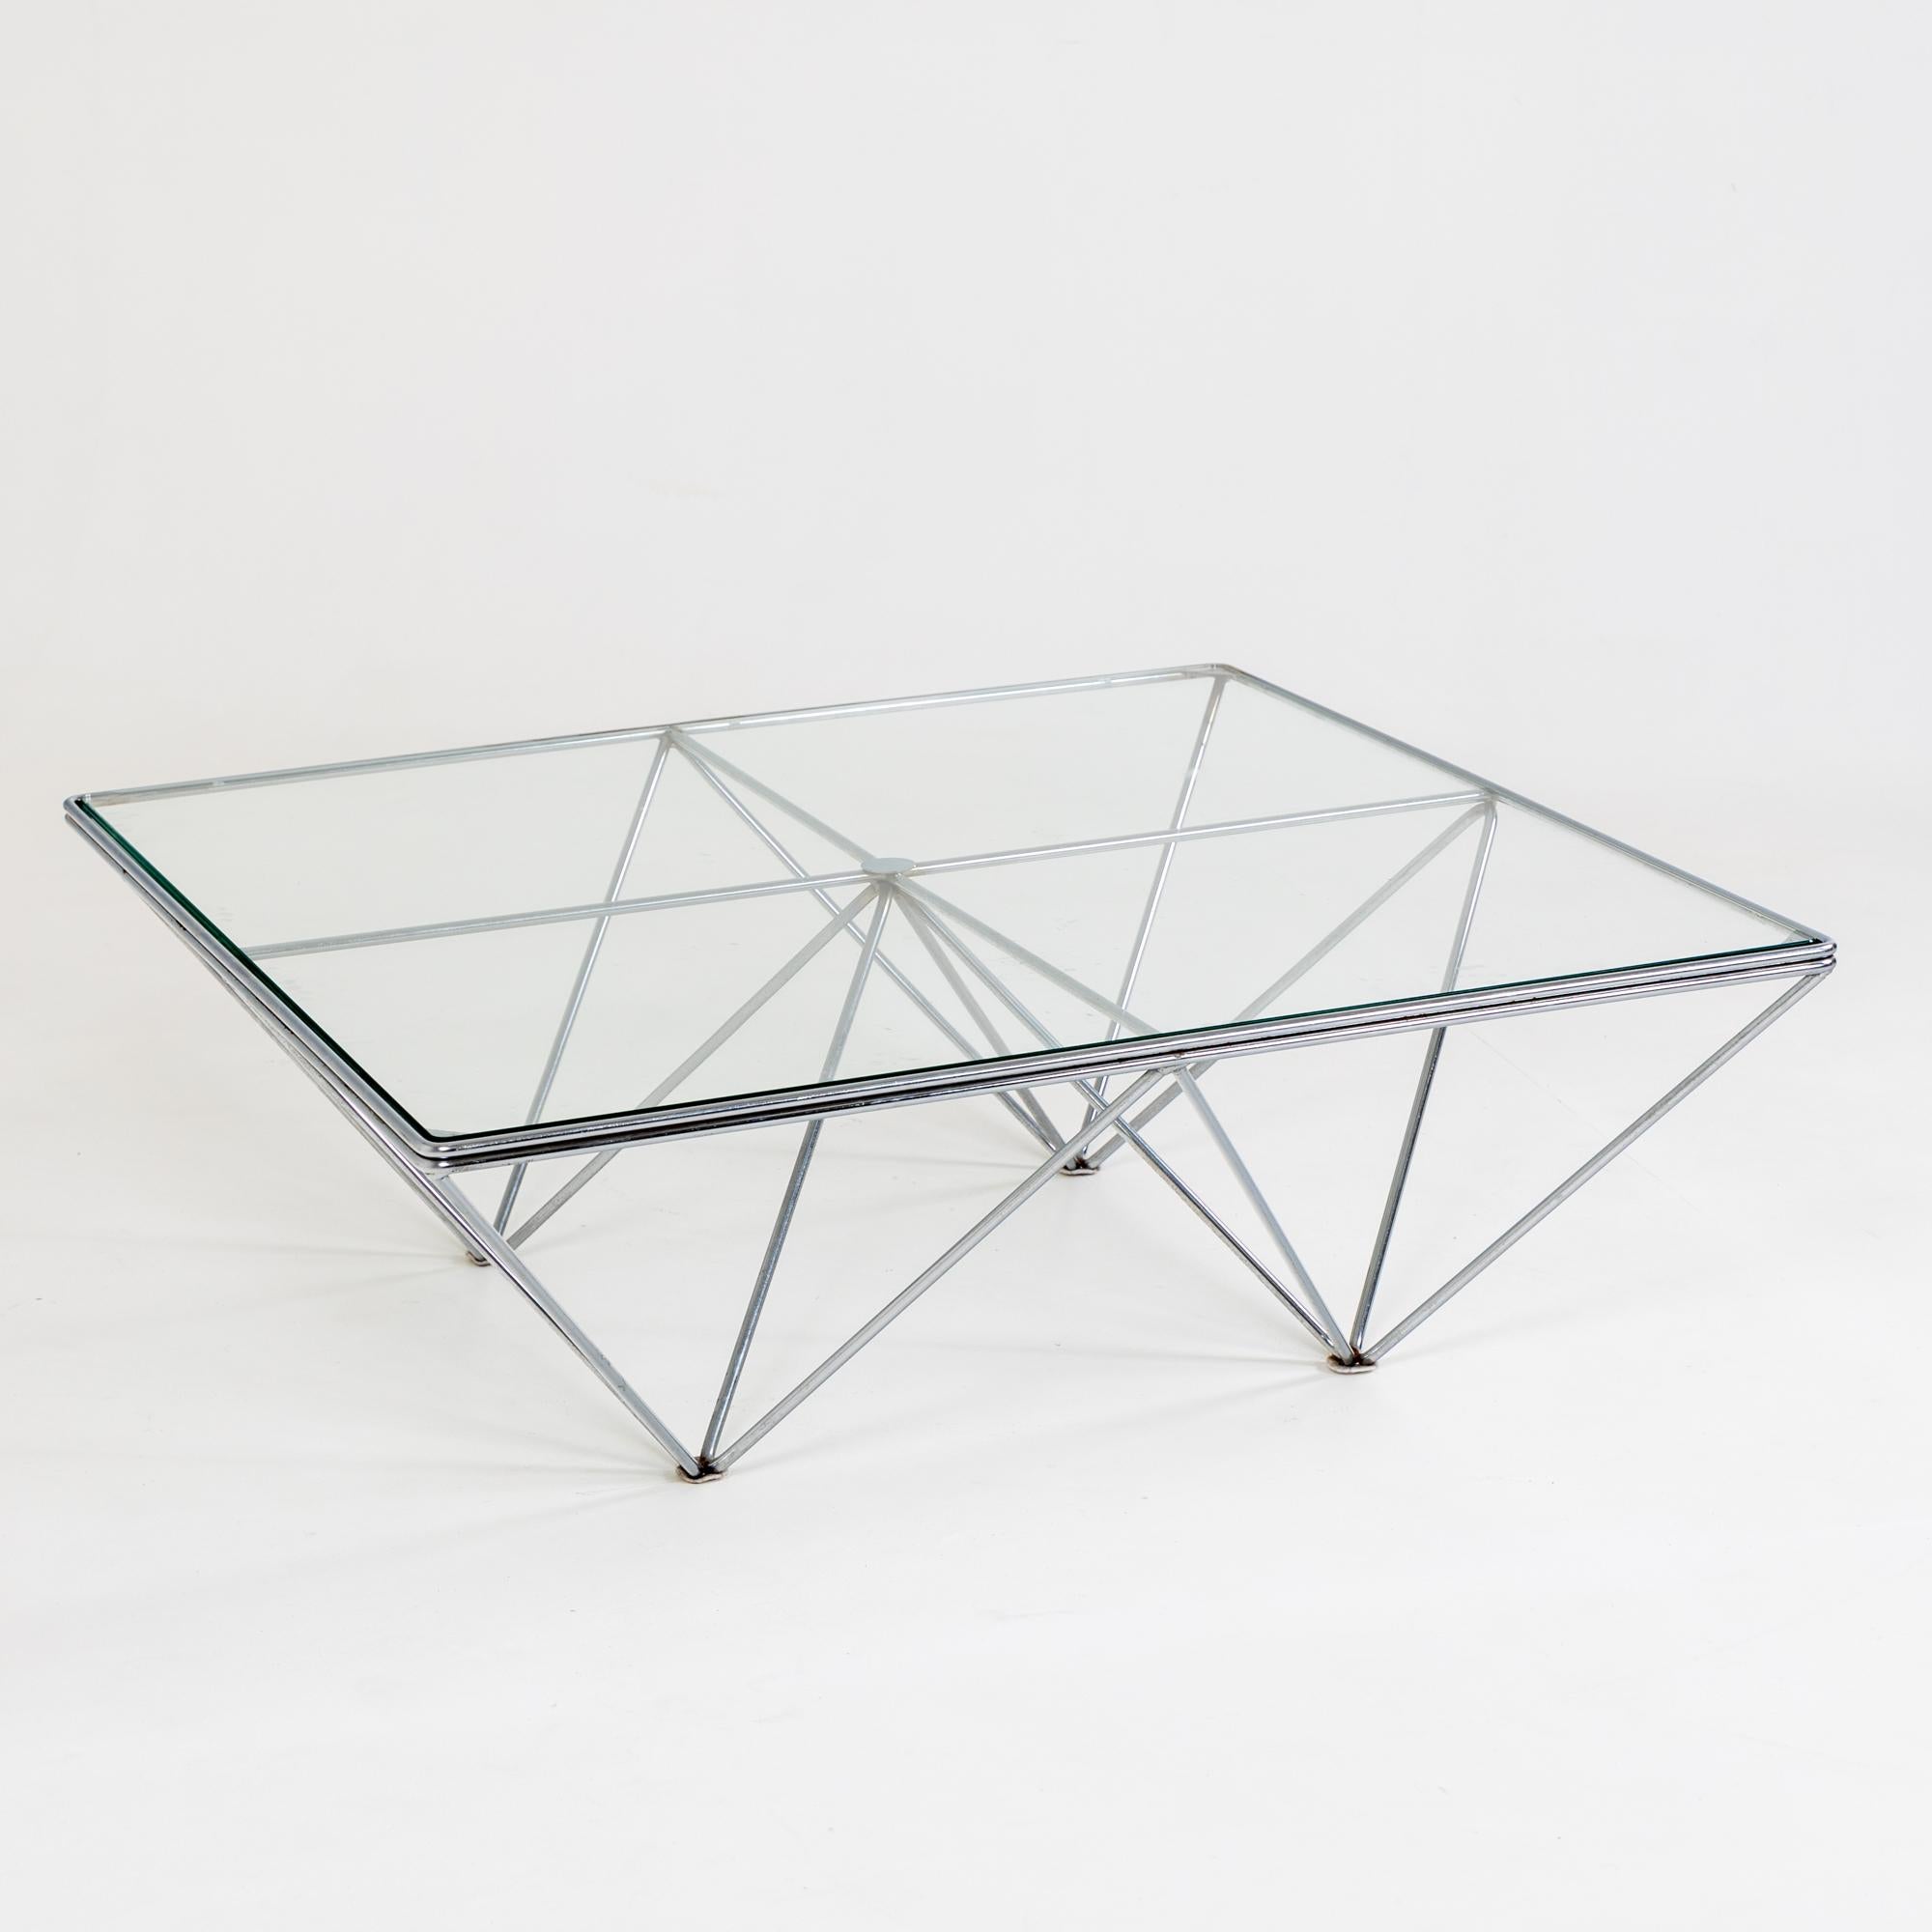 Late 20th Century Coffee Table Alanda, Chromed Metal, attributed to Paolo Piva for B&B Italy 1980s For Sale